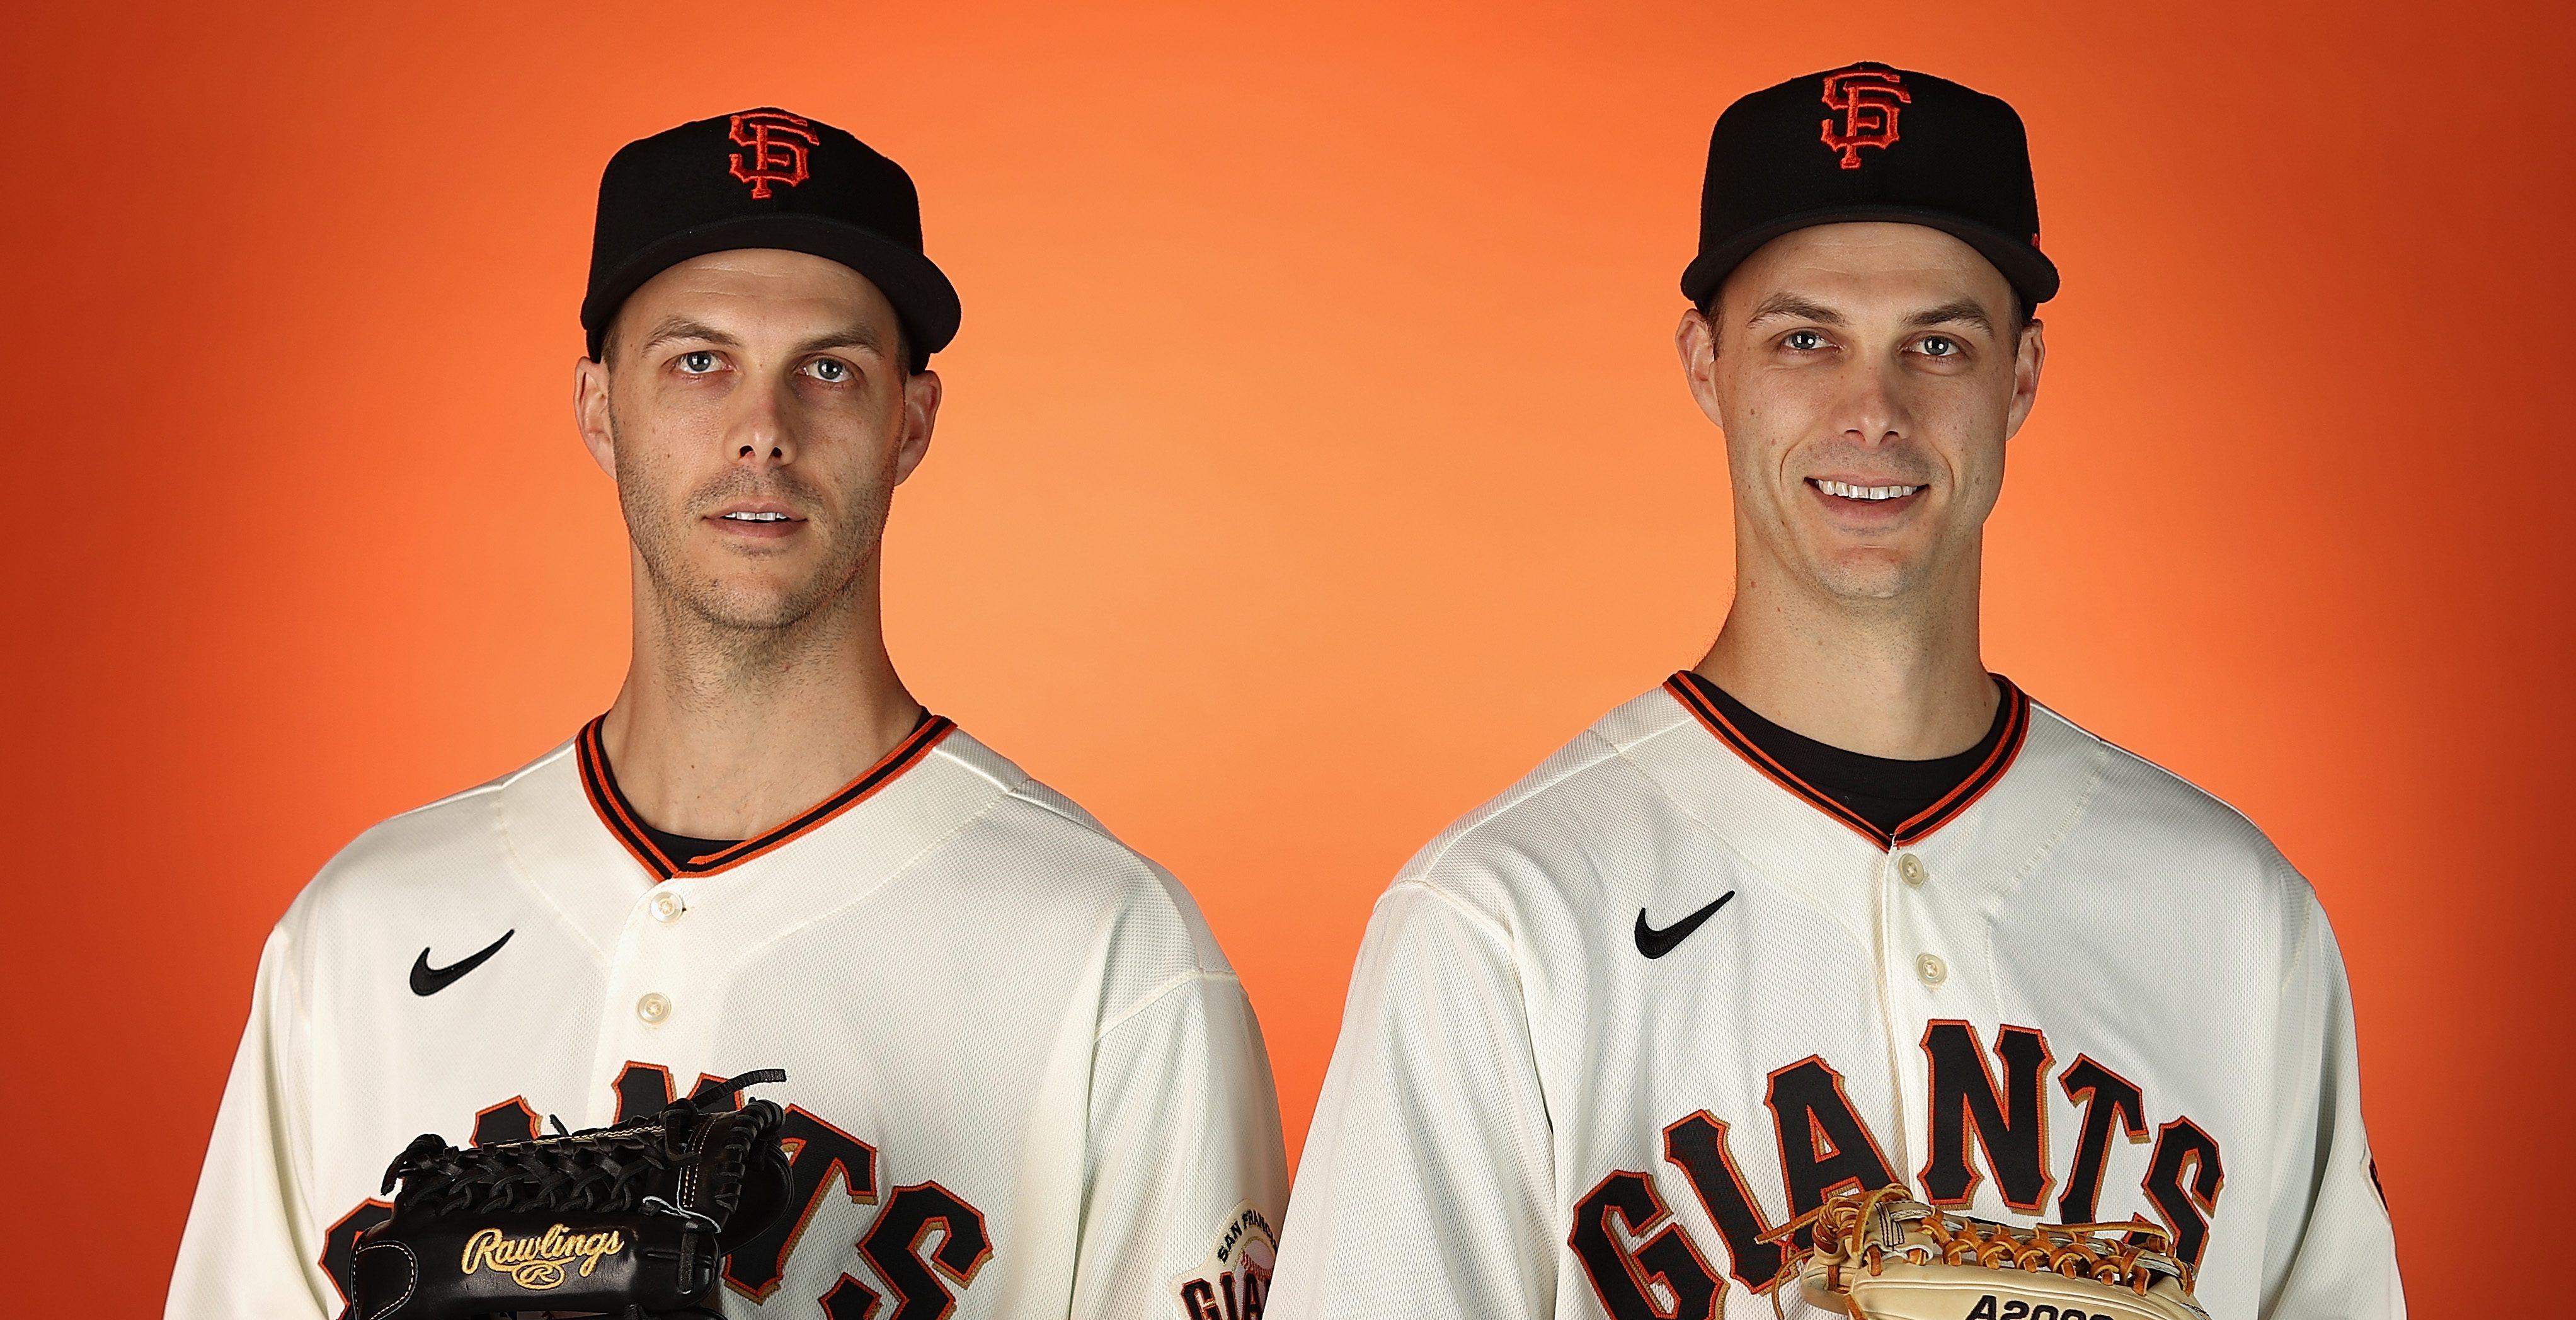 Giants Twin Pitchers Tyler and Taylor Rogers Have Identical Stats